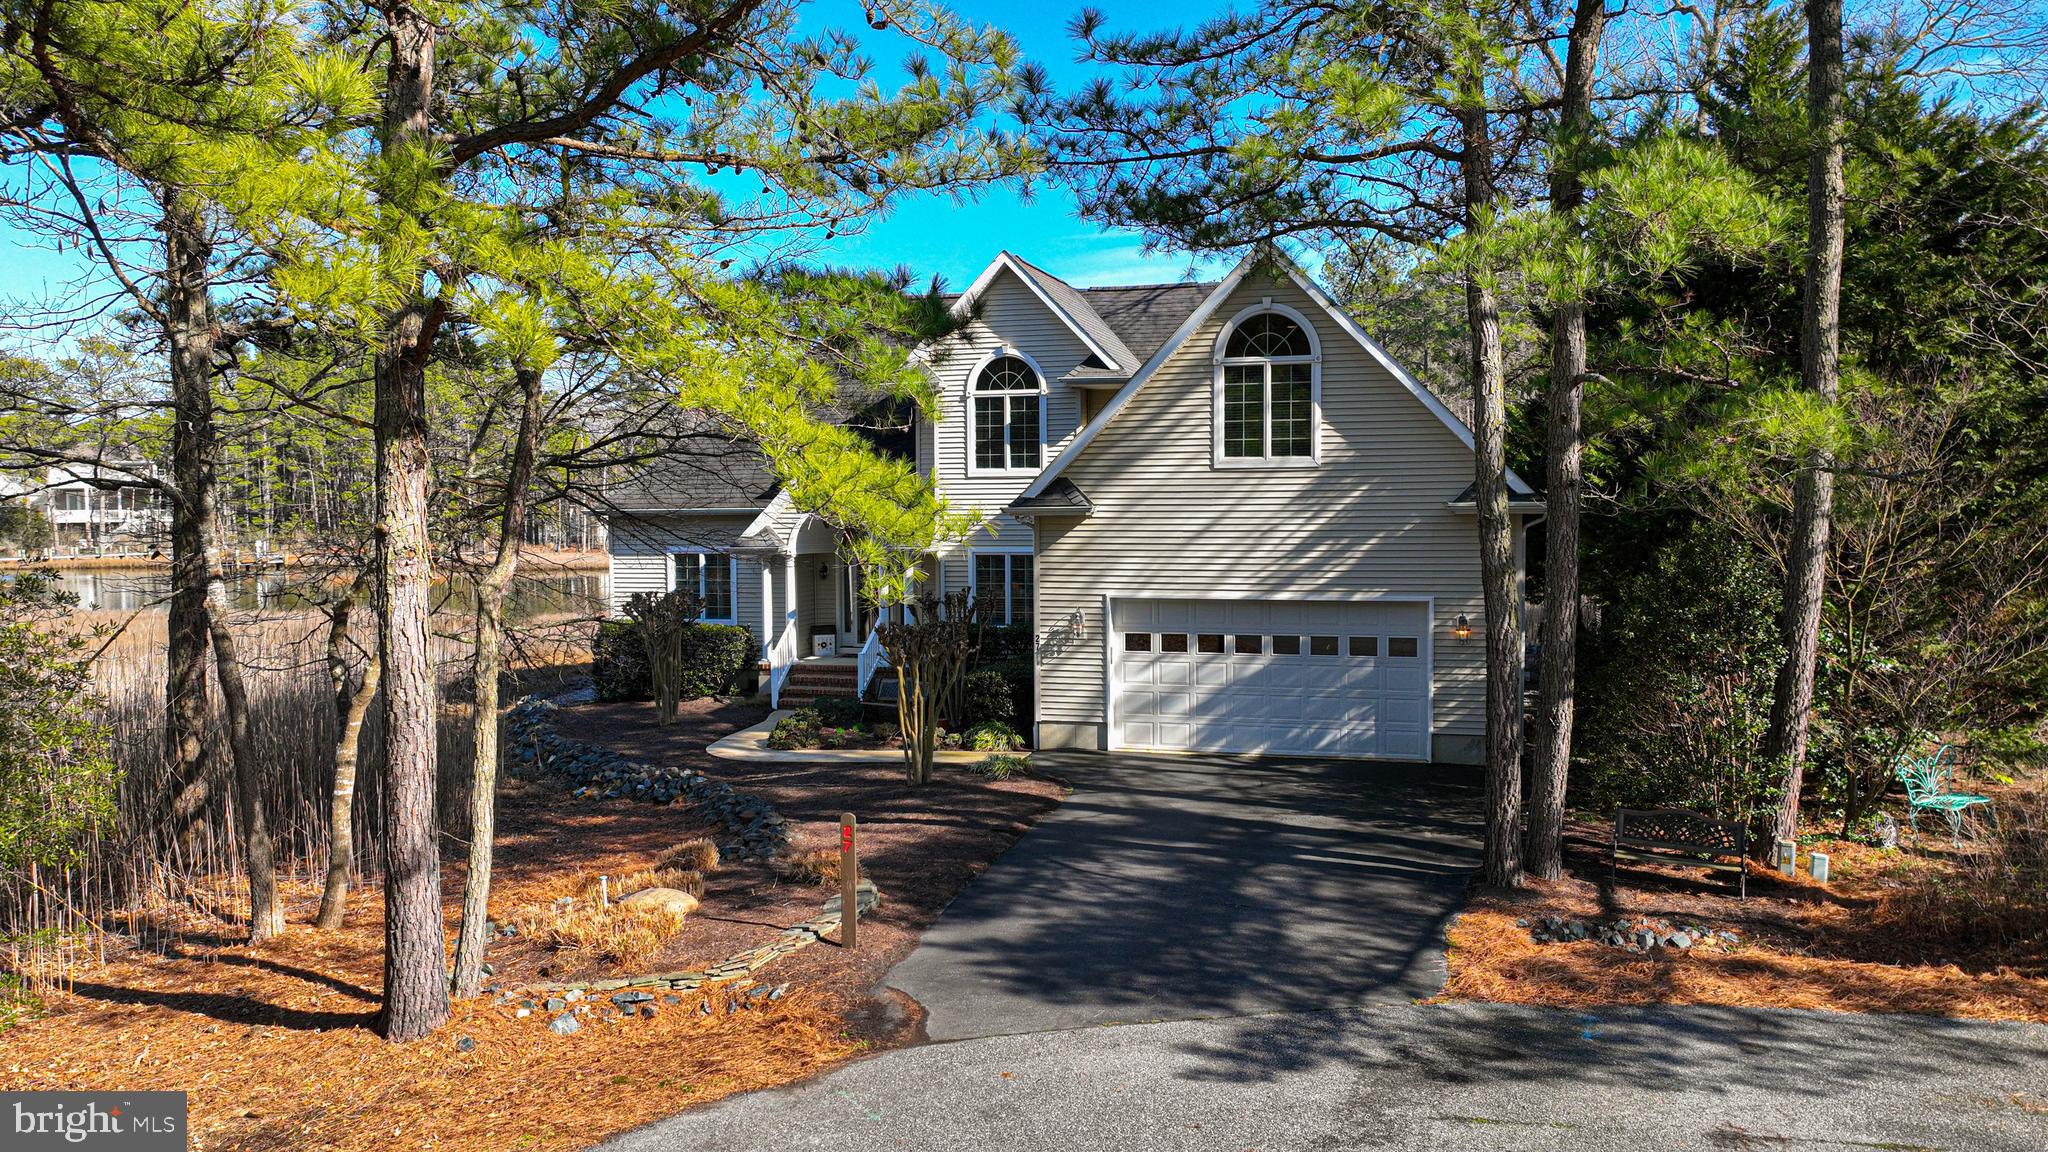 Enjoy tranquil views of Manklin Creek and marsh as you take in the natural beauty surrounding this waterfront home located in the Salt Grass Cove enclave of the Ocean Pines community.  The original owners worked with a reputable local builder (Beachwood) to create a custom design with great attention to detail and thoughtful planning. The living room is the heart of this home and offers water views, access to the screened porch and deck areas (overlooking the marsh & creek),  two sided fireplace, custom built-ins, and wet bar.   The adjacent kitchen with waterfront breakfast nook (w/ slider to deck) offers custom cabinetry & countertops, stainless appliances, pantry, and built-in work space.  The first floor owners suite offers water views, spacious en suite bathroom with double sink vanity, walk in shower w/ built-in shelves and seating & walk in closet with newer custom closet system.   The large dining room located by the front entry can double as a home office space and is equipped with additional outlets.  Upstairs you will find a 2nd floor landing that can serve multiple purposes, along with three guest rooms (one w/ private bath) and additional guest bathroom.  Plenty of storage throughout this home including thoughtfully placed eave storage access in multiple locations upstairs, oversized closets, and pull down attic access.  Walk through the laundry room to the attached garage where you can store your vehicles AND still have room for workspace, shelving as well as extra fridge & utility sink.  The oversized lot (.41 acre) is located on a cul-de-sac and requires little yard maintenance thanks to lovely mulch beds, extensive hardscaping in the backyard and natural marsh grasses that line the side yard.  Ocean Pines is a GREAT community-  the perfect place  for a second home OR year-round residence.  It offers low HOA fees ($986/yr) and a la carte pricing for various amenity options such as;  golf, pickleball & tennis, indoor and outdoor pools, beach club and 